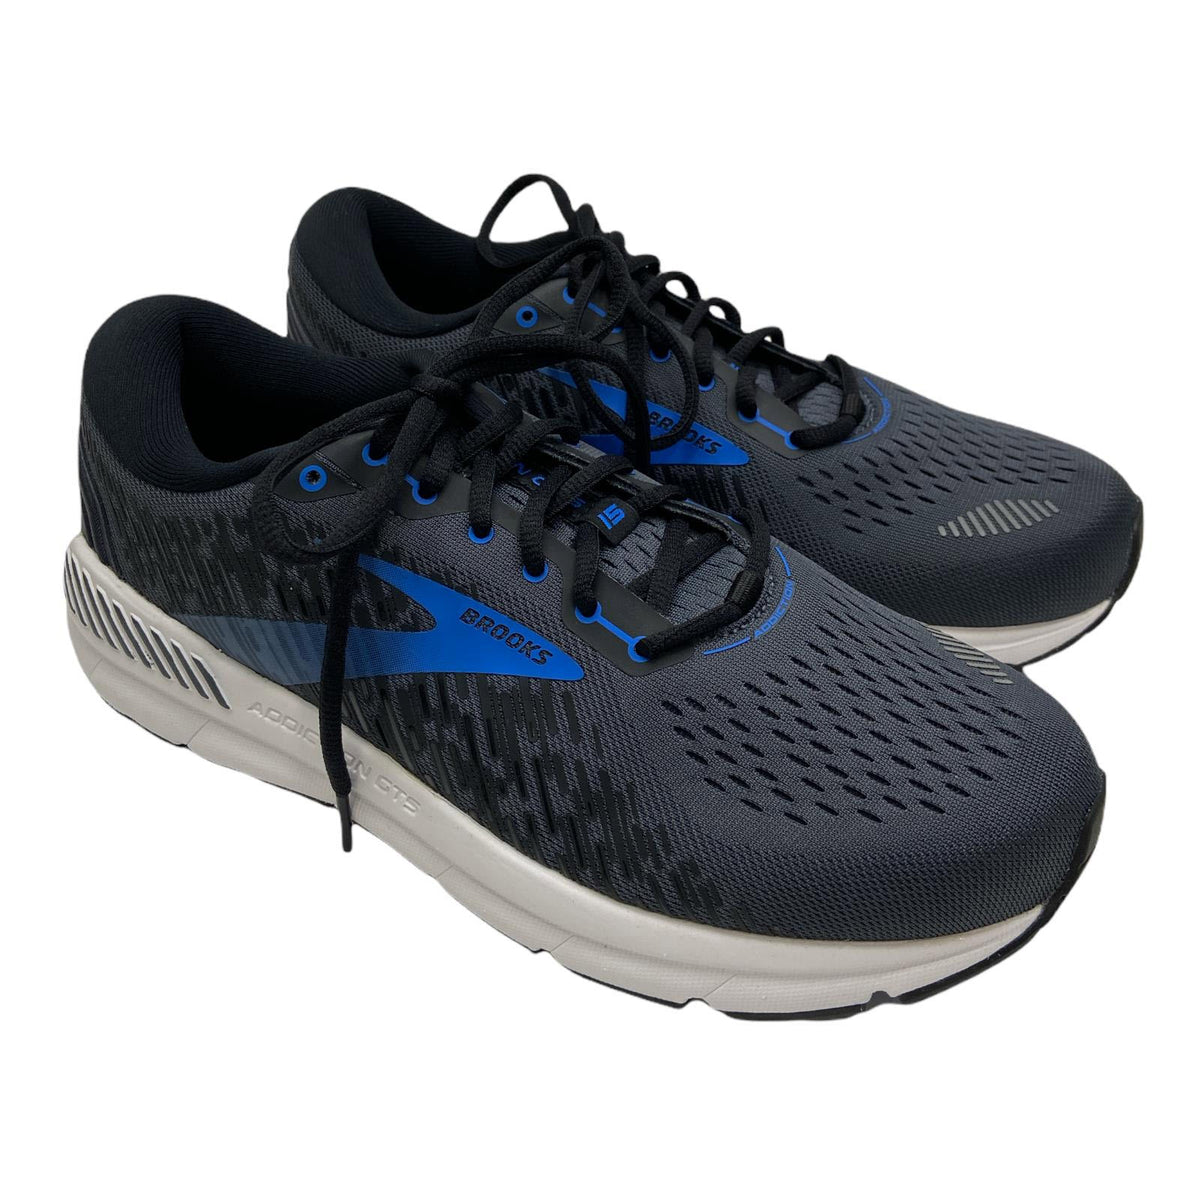 A pair of black and blue Brooks Addiction GTS 15 (Ink/Black) running shoes with GuideRail technology for overpronators, featuring laces on a white background.